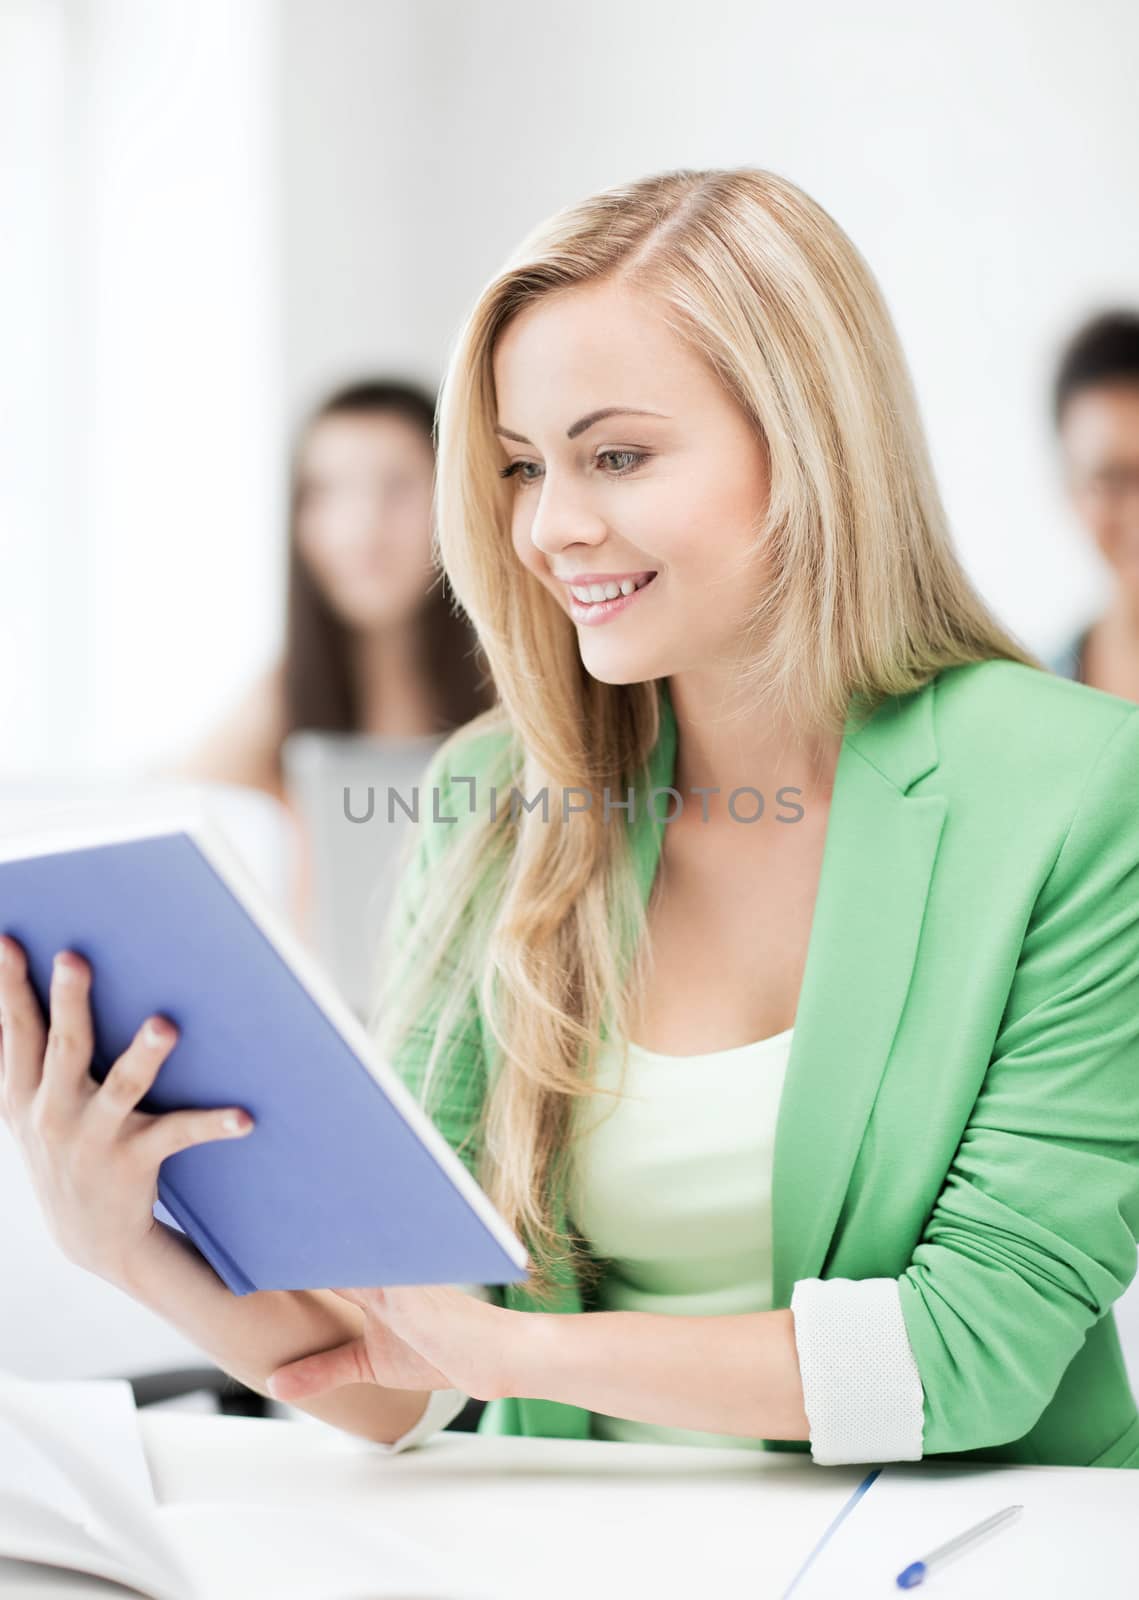 education concept - smiling young girl reading book at school